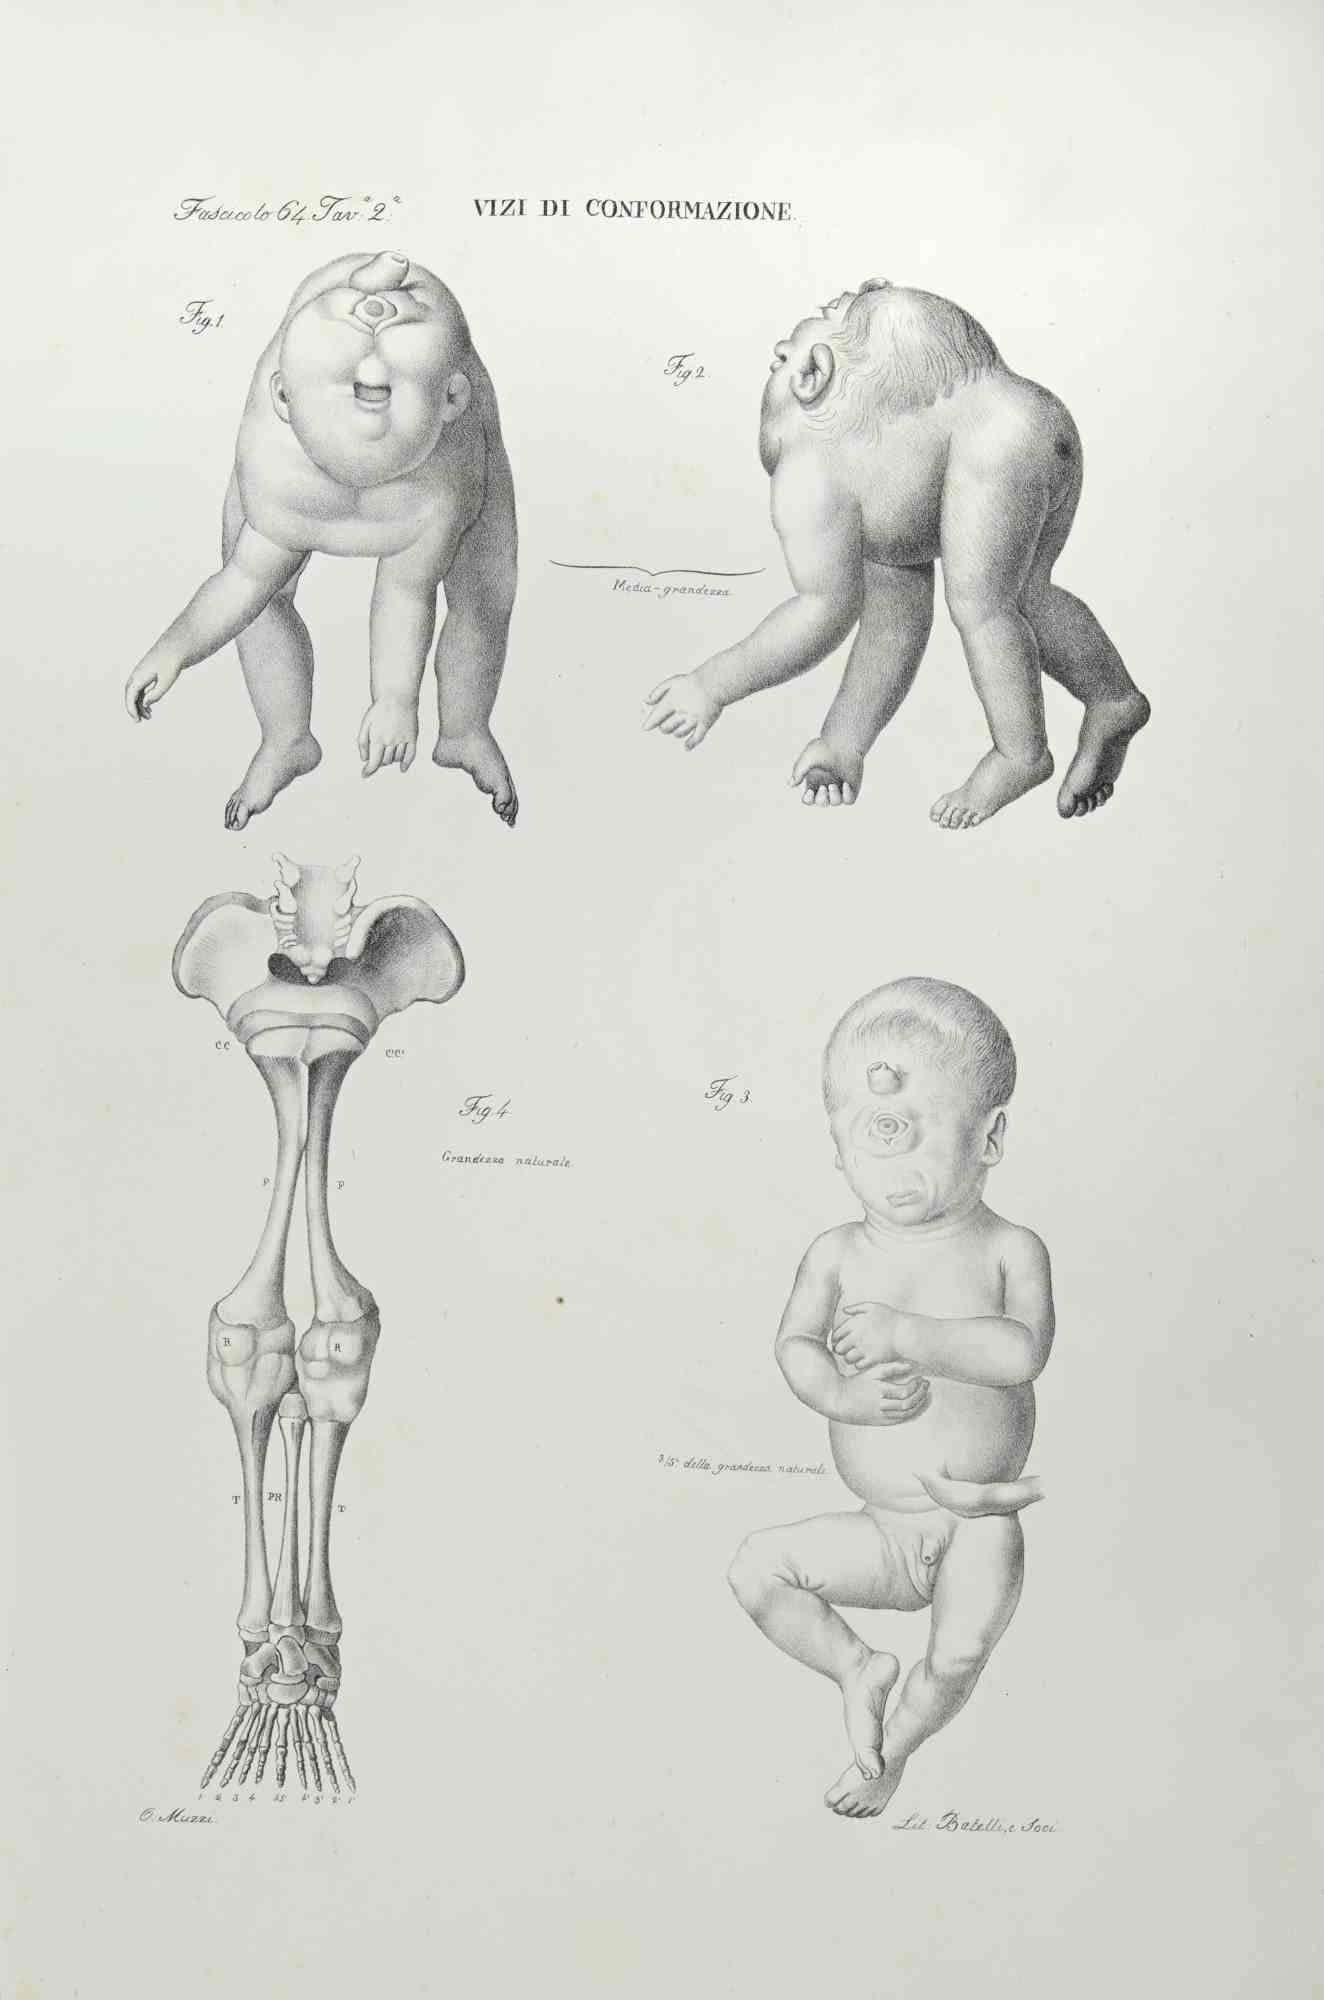 Conformation Defects is a  lithograph realized by Ottavio Muzzi for the edition of Antoine Chazal, Human Anatomy, Printers Batelli and Ridolfi, 1843.

The work belongs to the Atlante generale della anatomia patologica del corpo umano by Jean